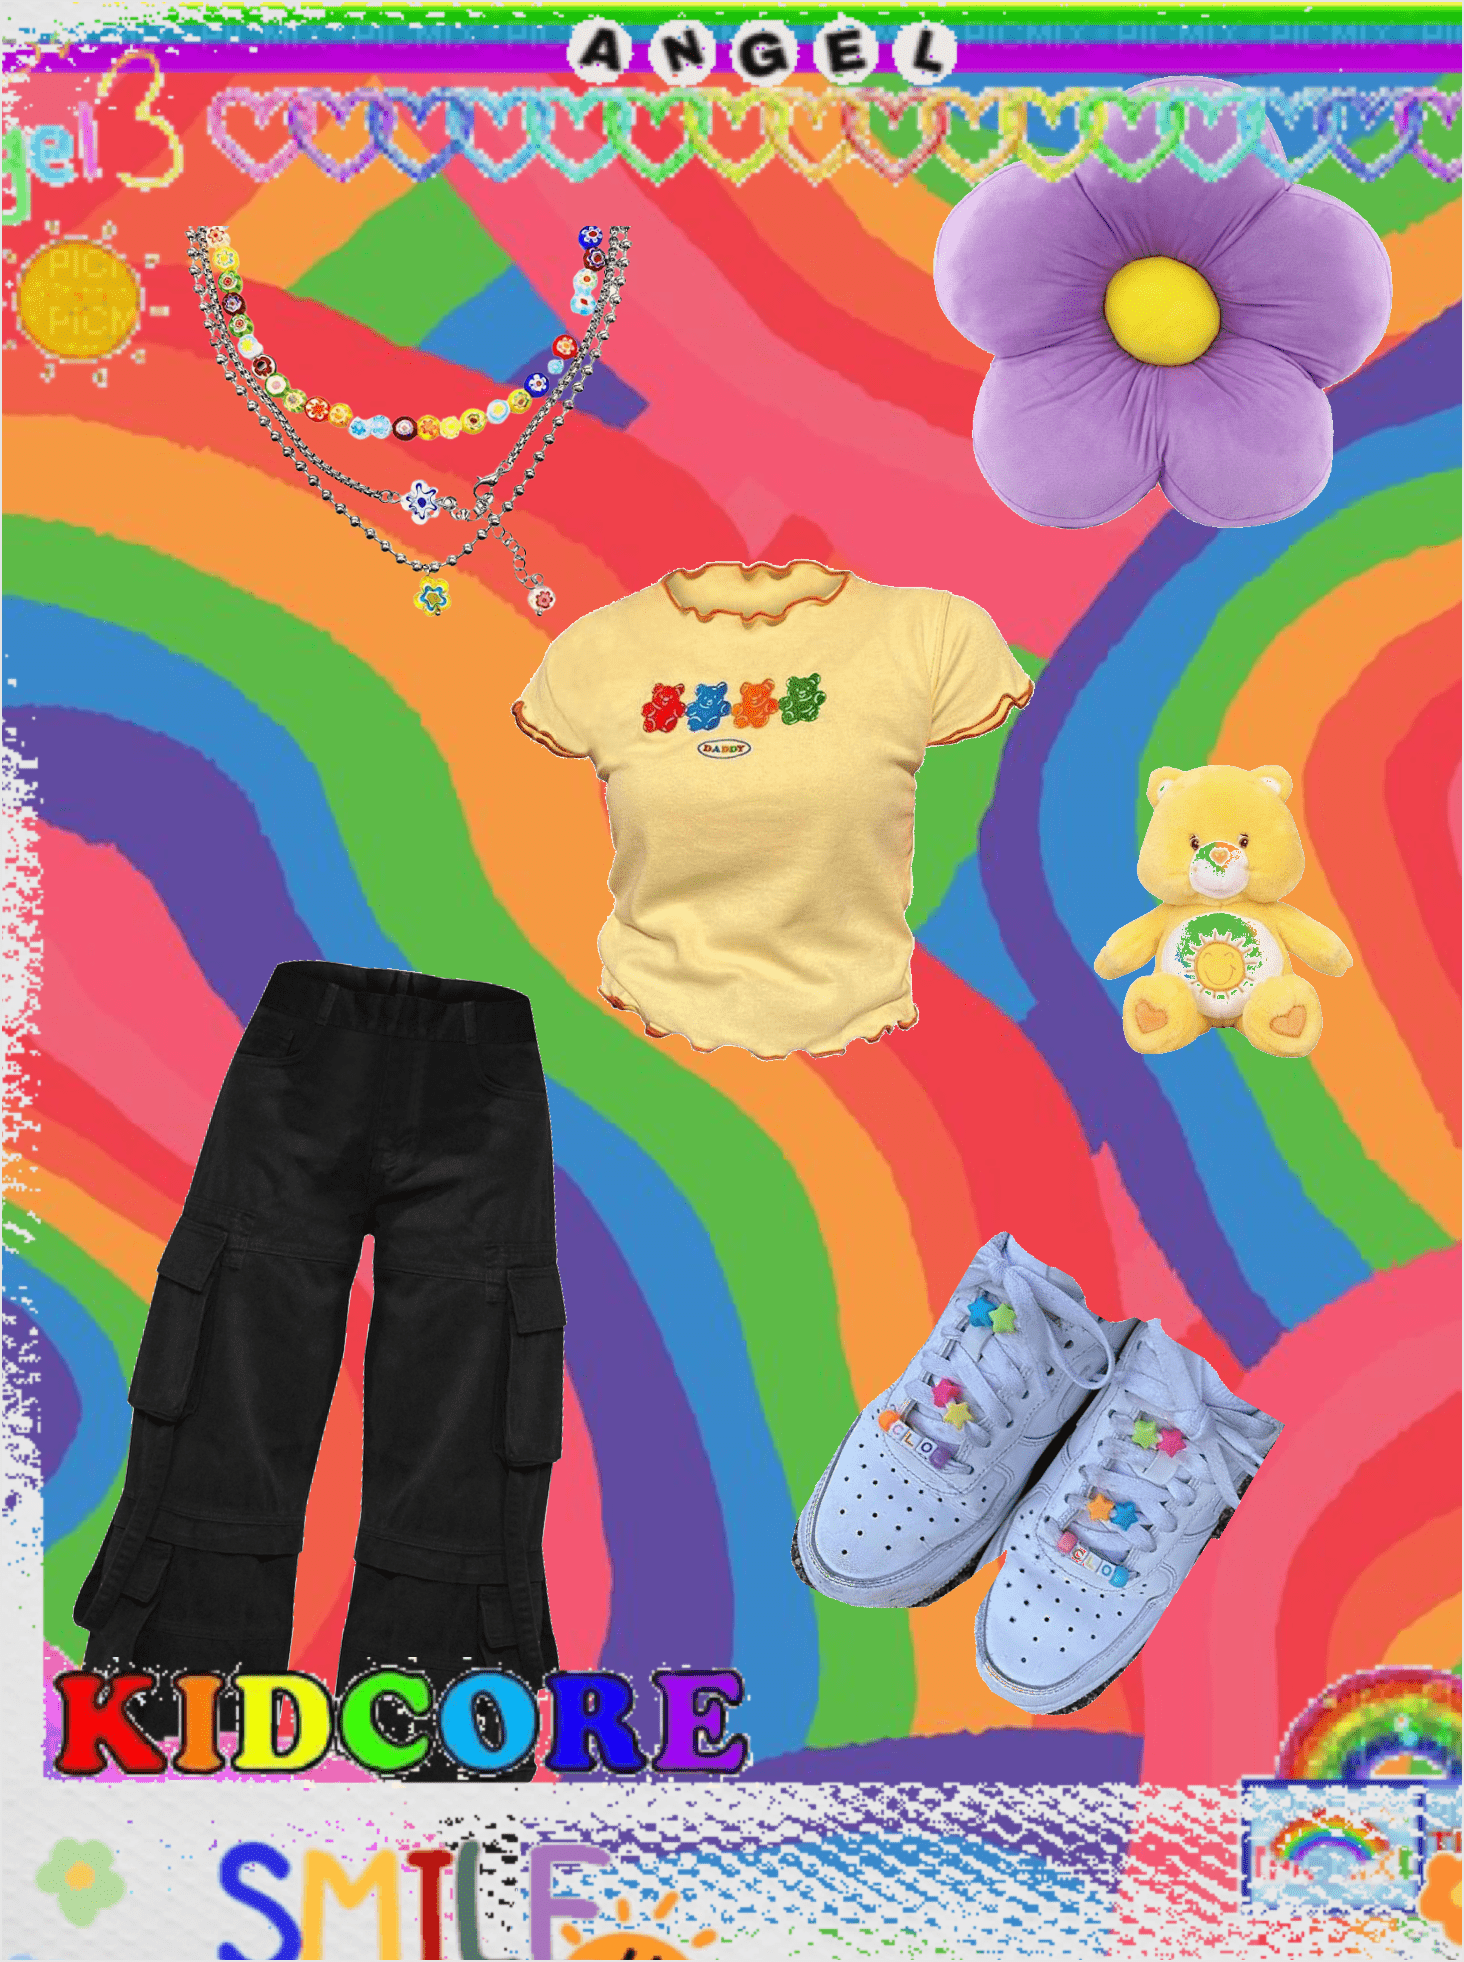 A colorful image with a rainbow background, a yellow t-shirt, black cargo pants, white tennis shoes, a purple flower necklace, a yellow teddy bear keychain, and the word 